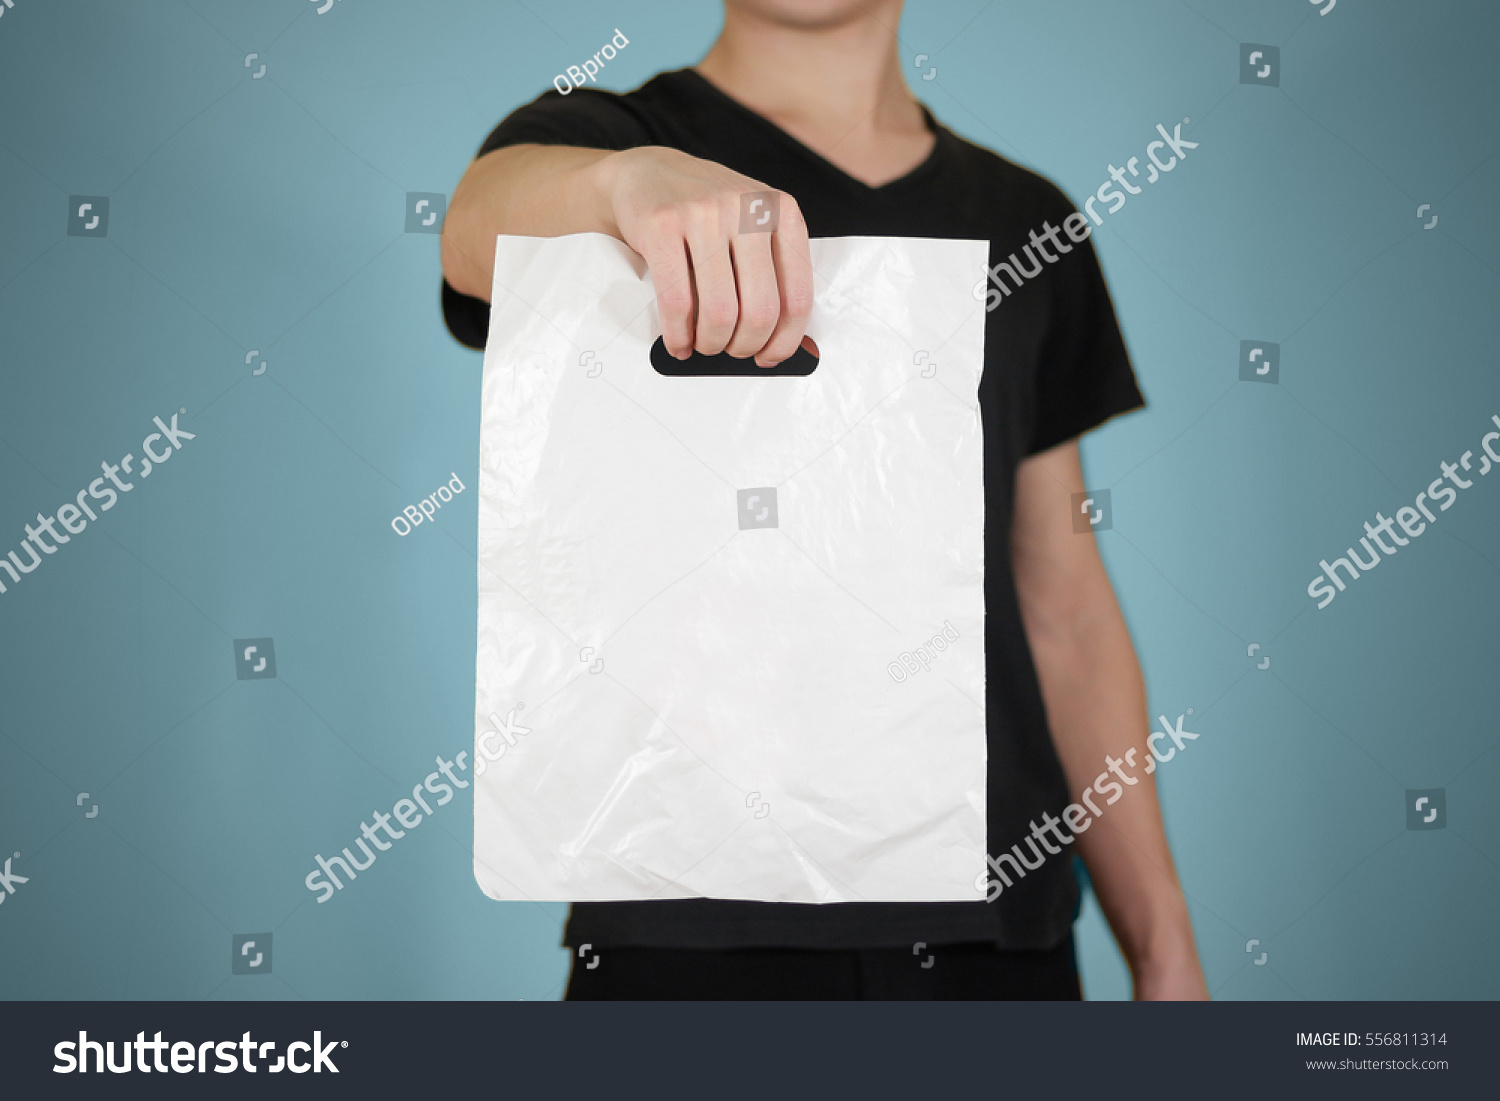 Man shows white blank plastic bag mock up isolated. Empty white polyethylene package mockup. Consumer pack ready for logo design or identity presentation. Commercial product food packet handle #556811314